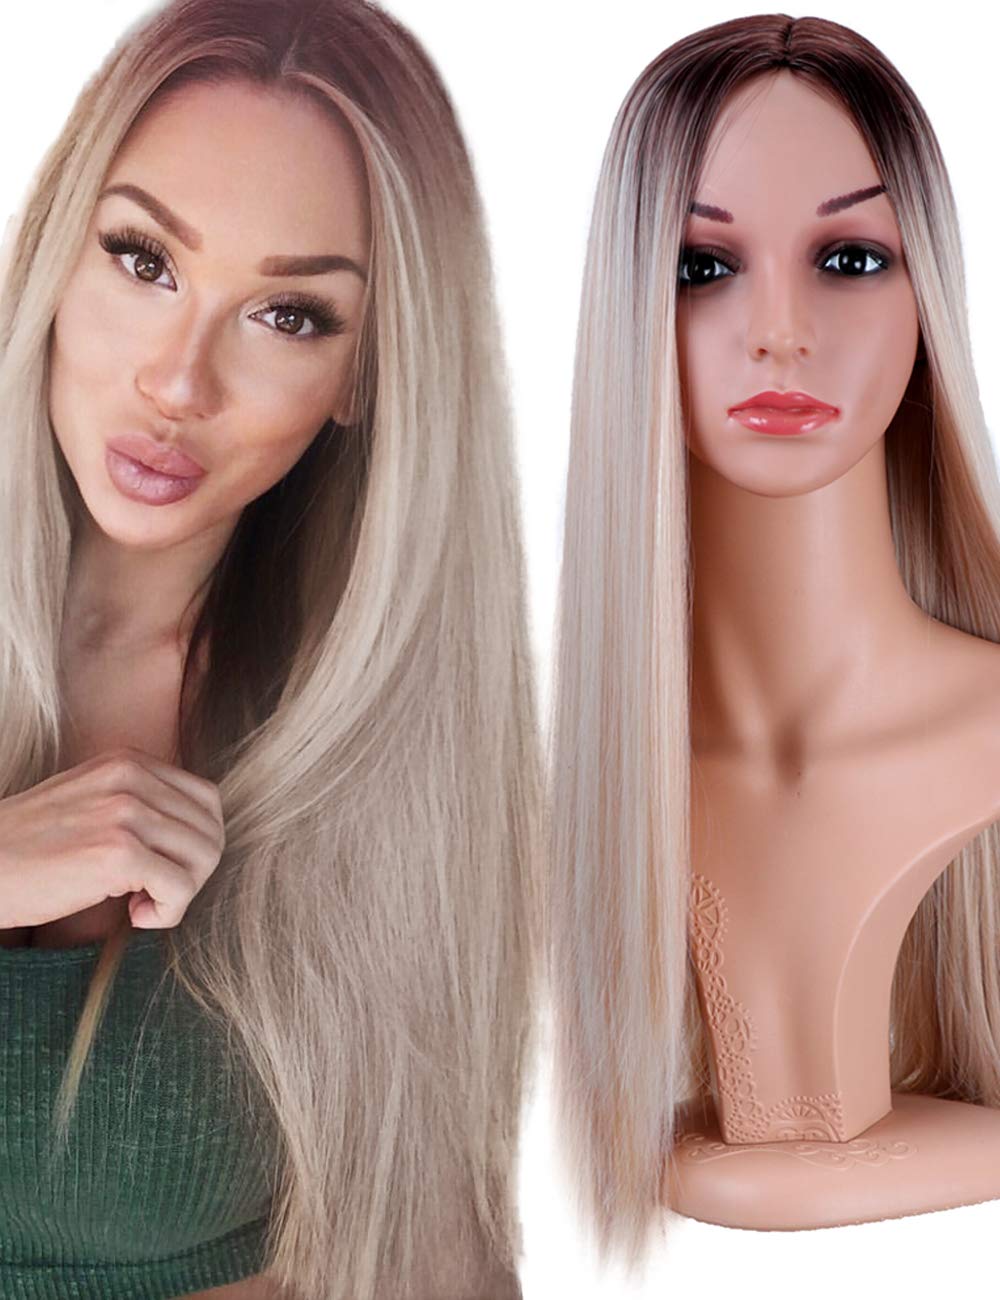 Price:$16.99     Fani Wigs Long Straight Blond Ombre Wigs for Women Dark Roots Middle Part Synthetic Full Wig Cosplay Wigs with Free Wig Cap (Ash Blonde)   Beauty